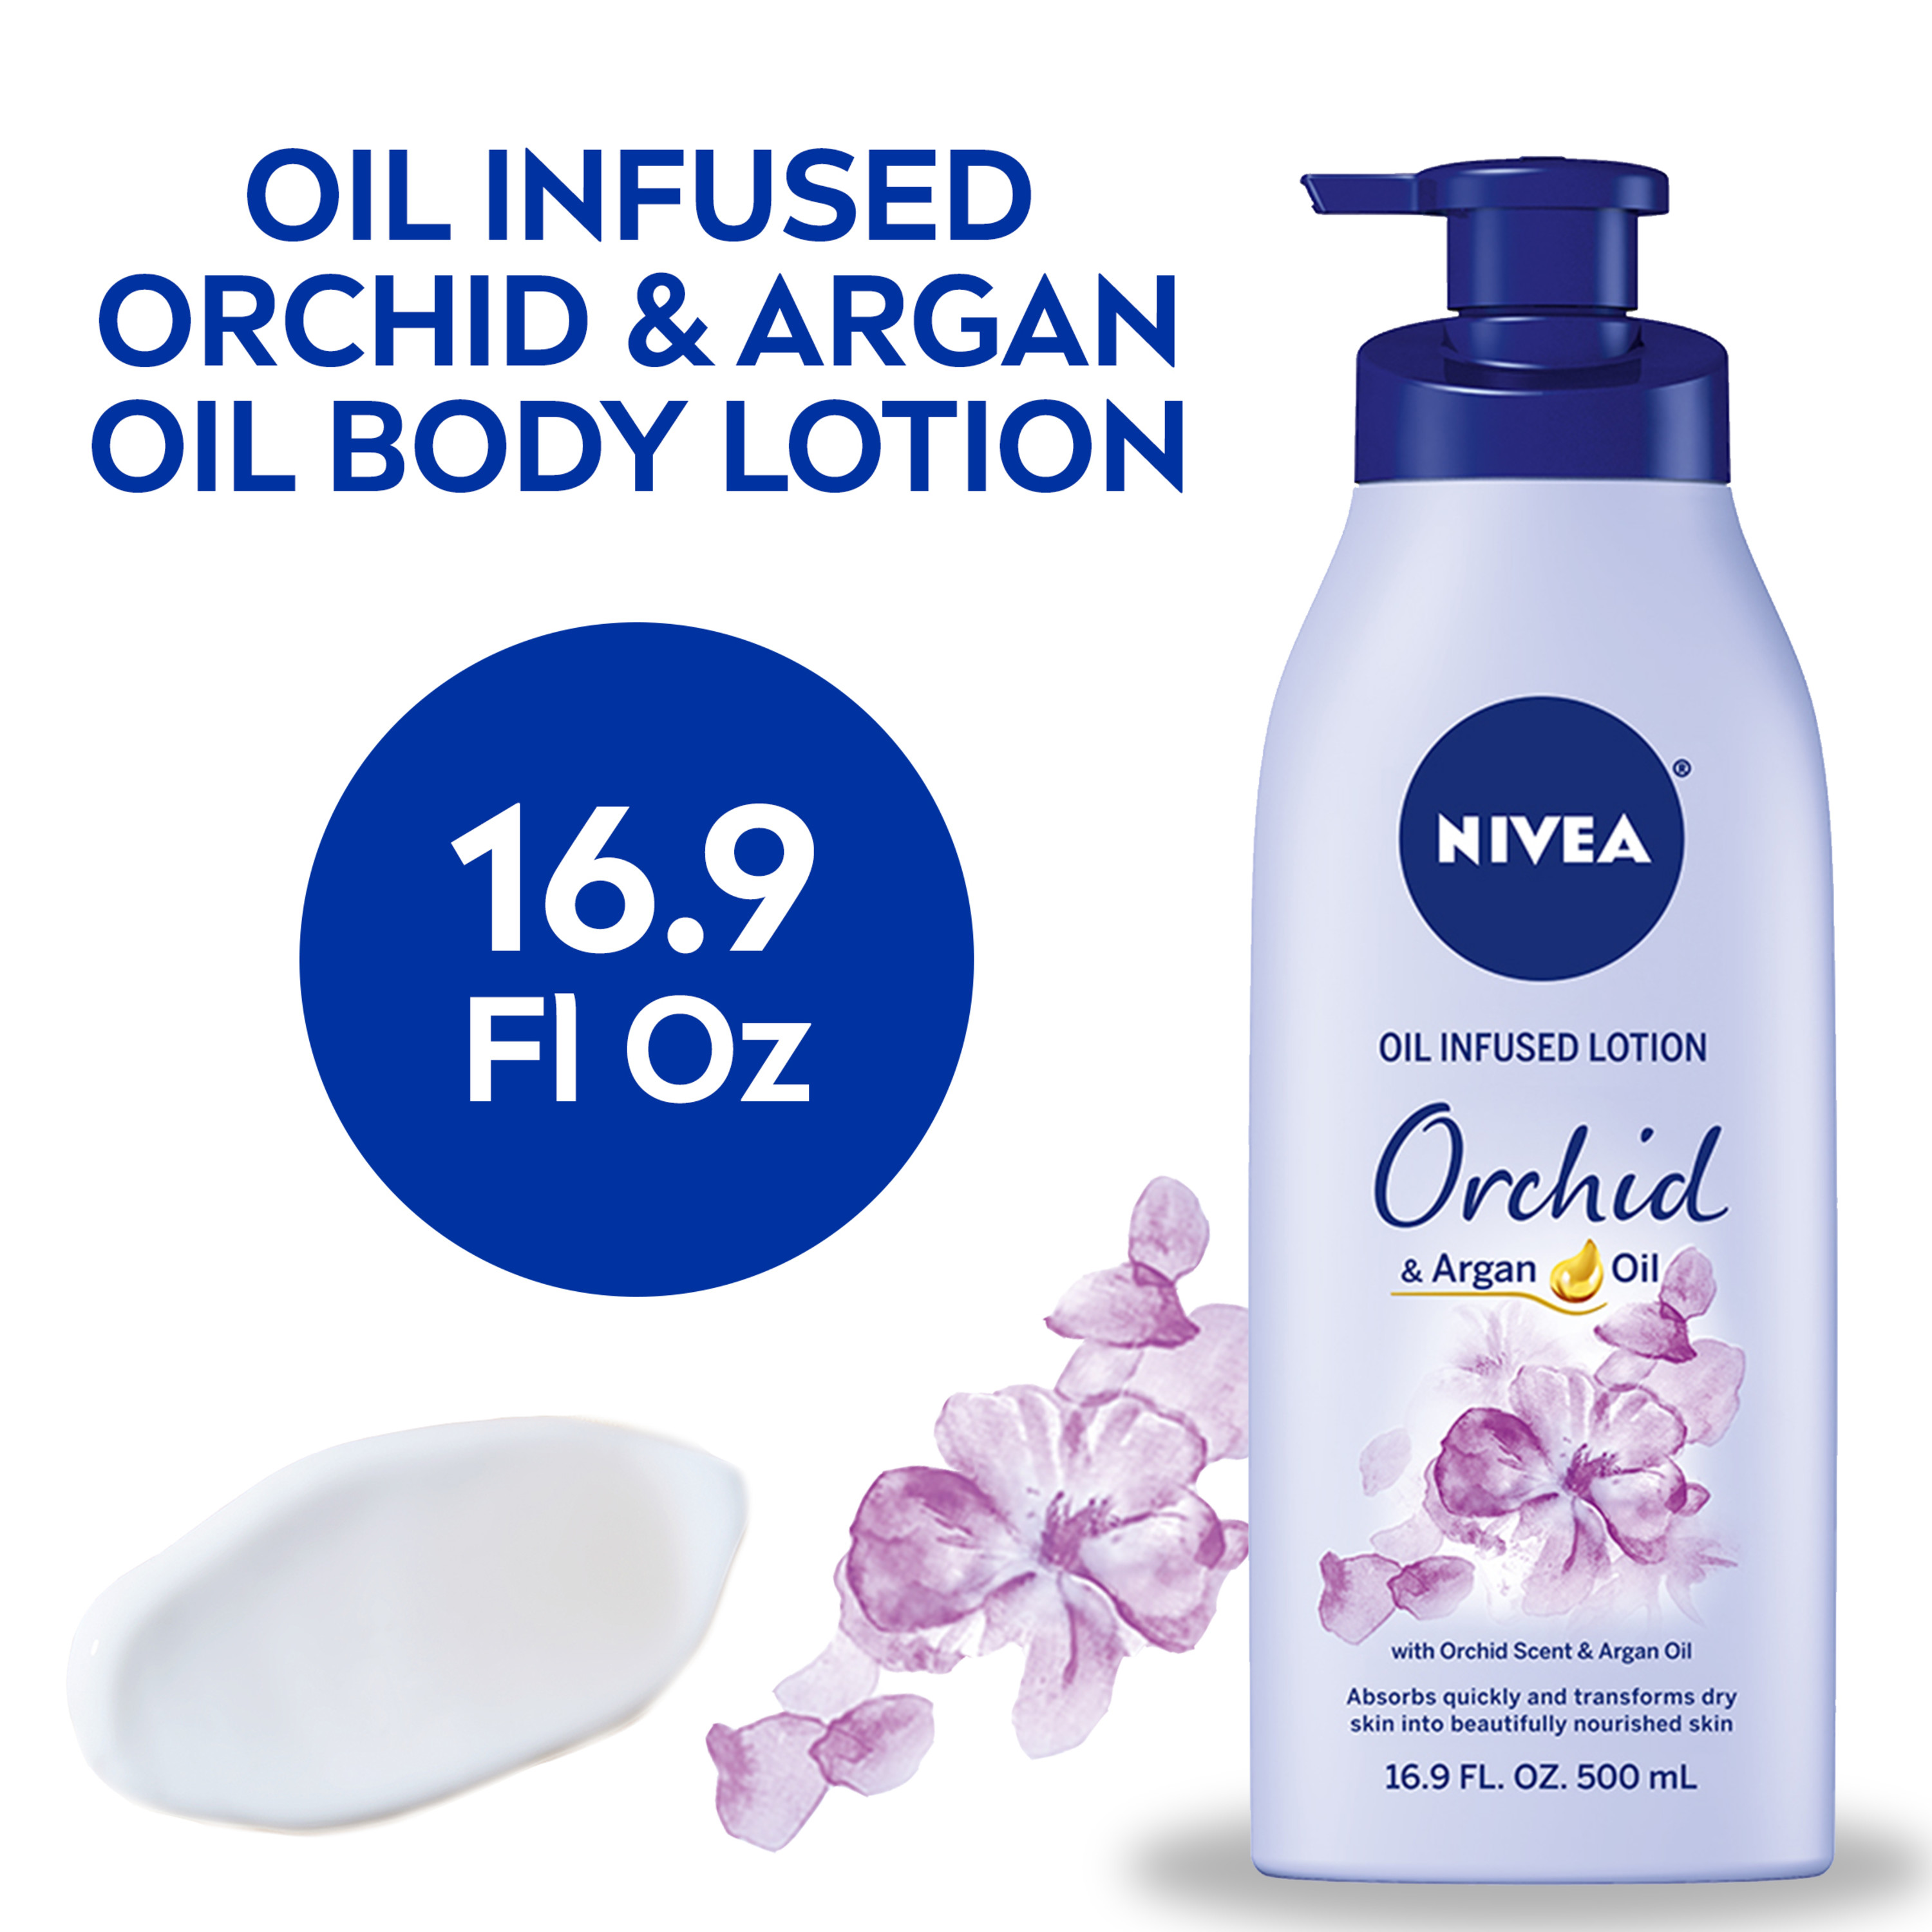 NIVEA Oil Infused Body Lotion, Orchid and Argan Oil, 16.9 Fl Oz Pump Bottle - image 1 of 14